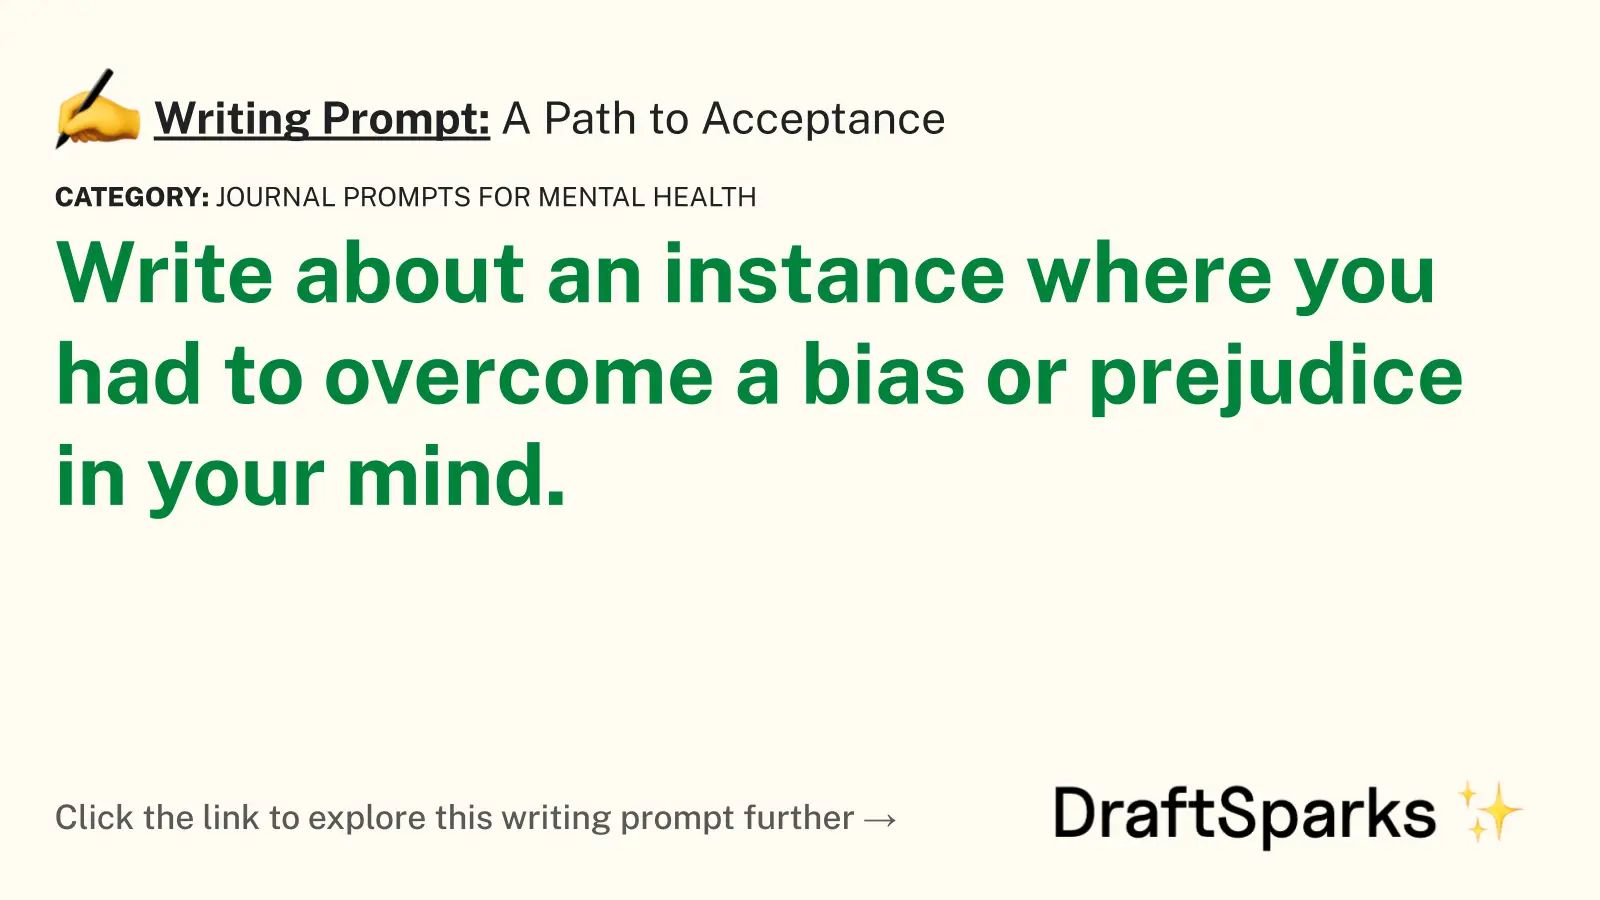 A Path to Acceptance